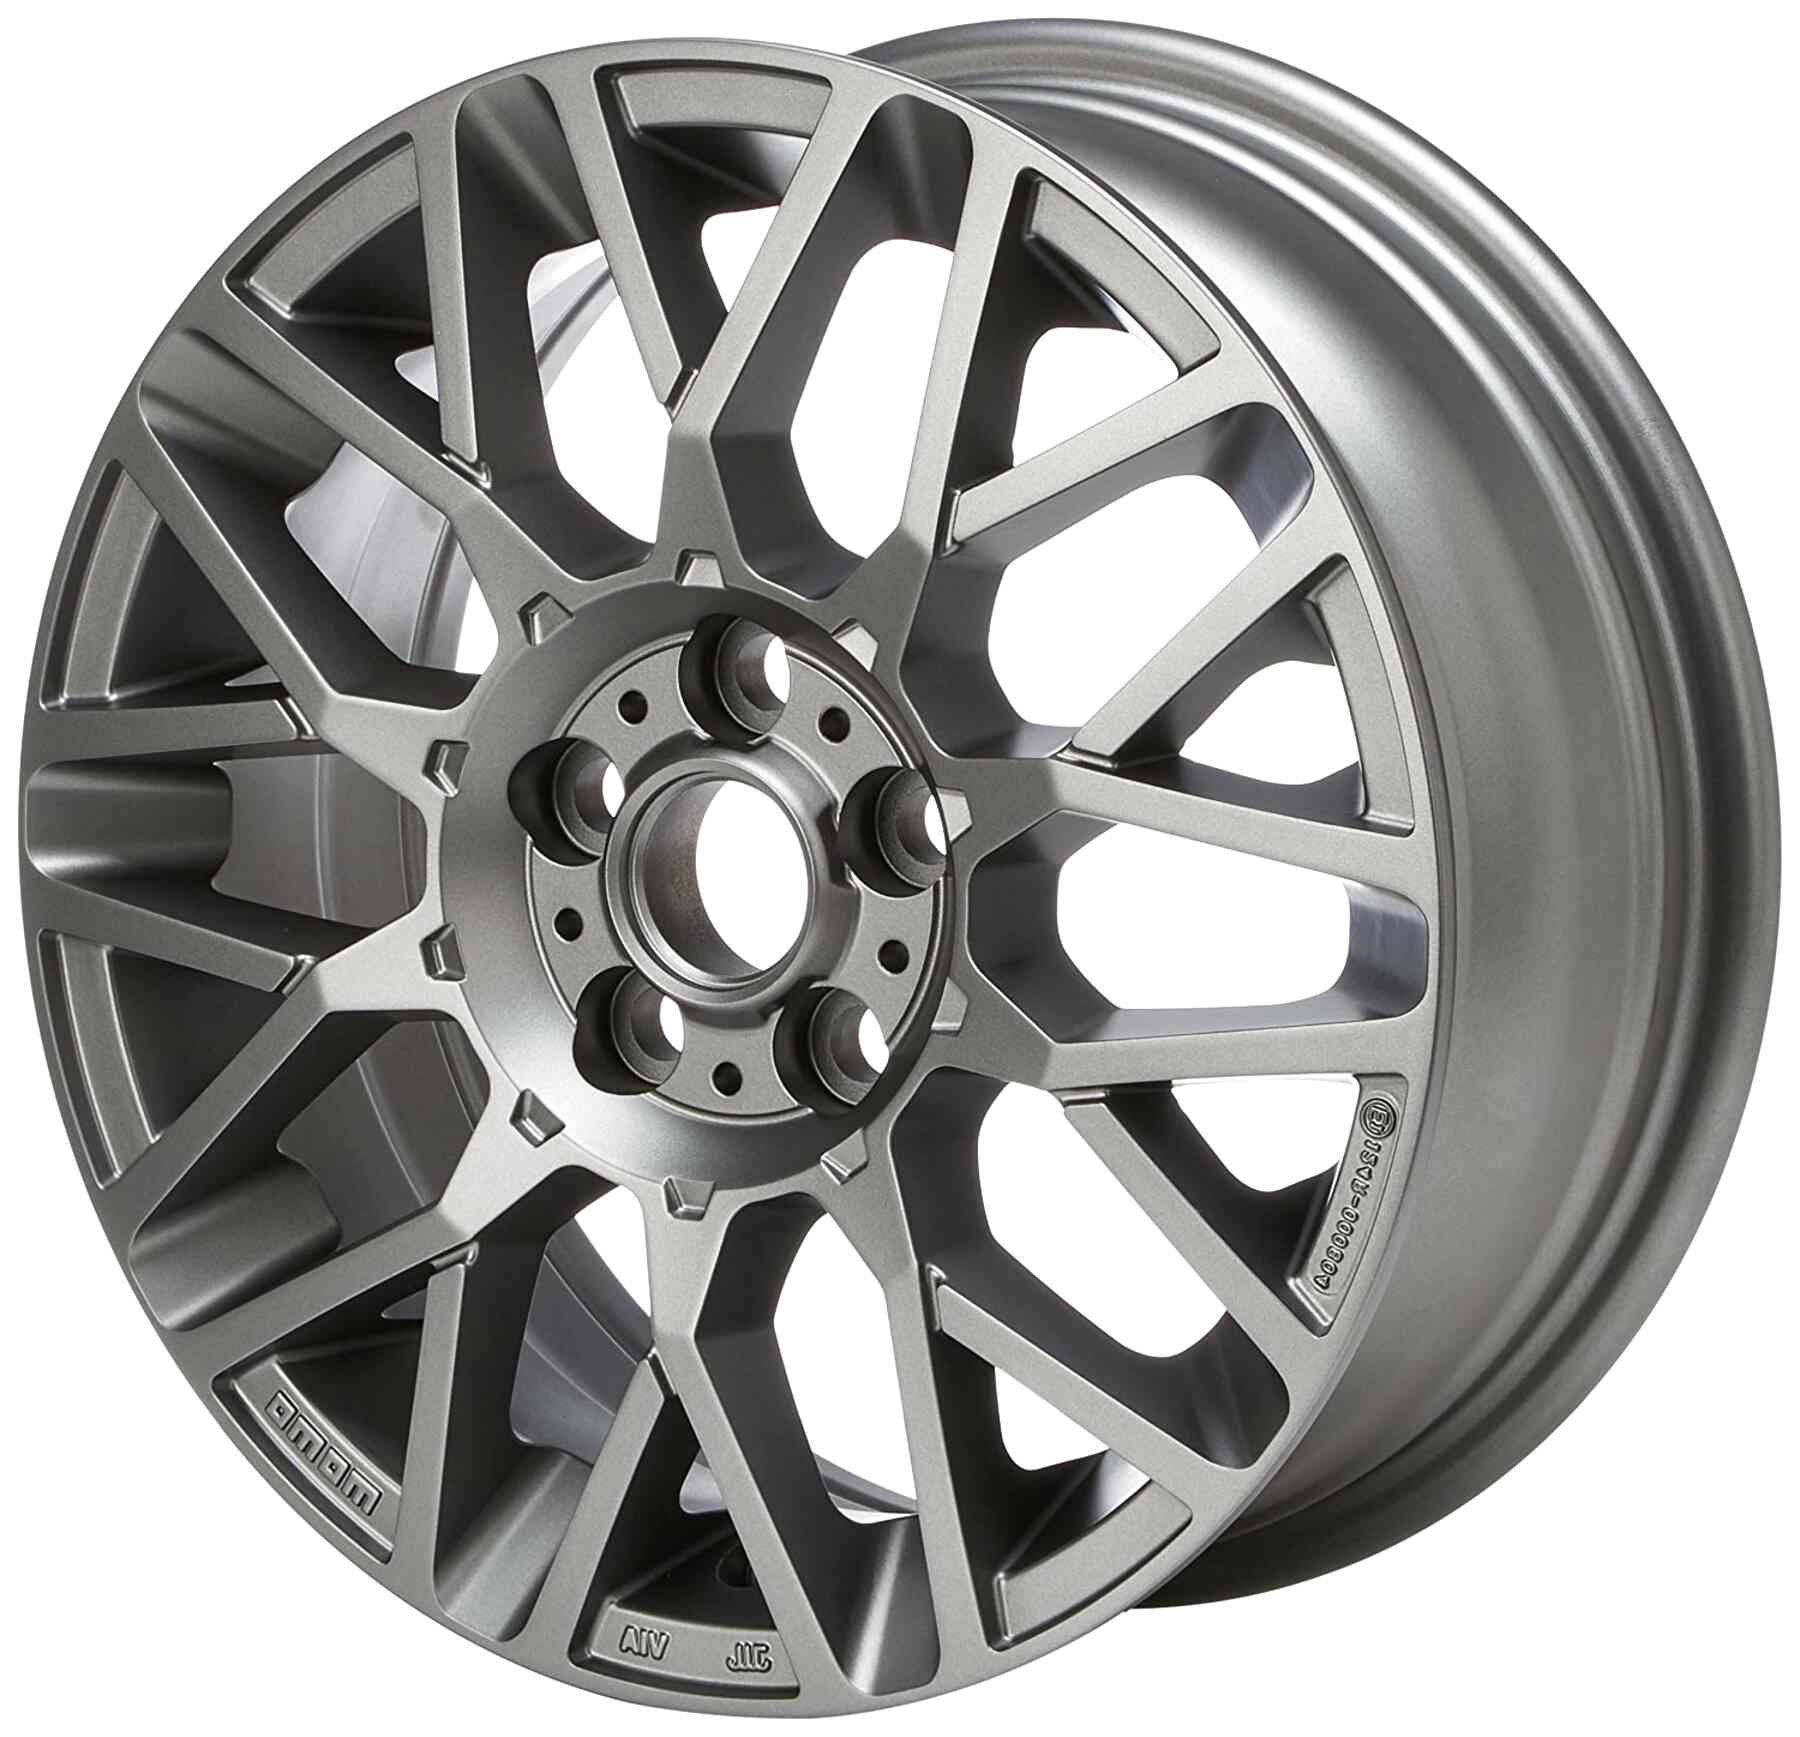 5X100 Alloy Wheels for sale in UK View 50 bargains